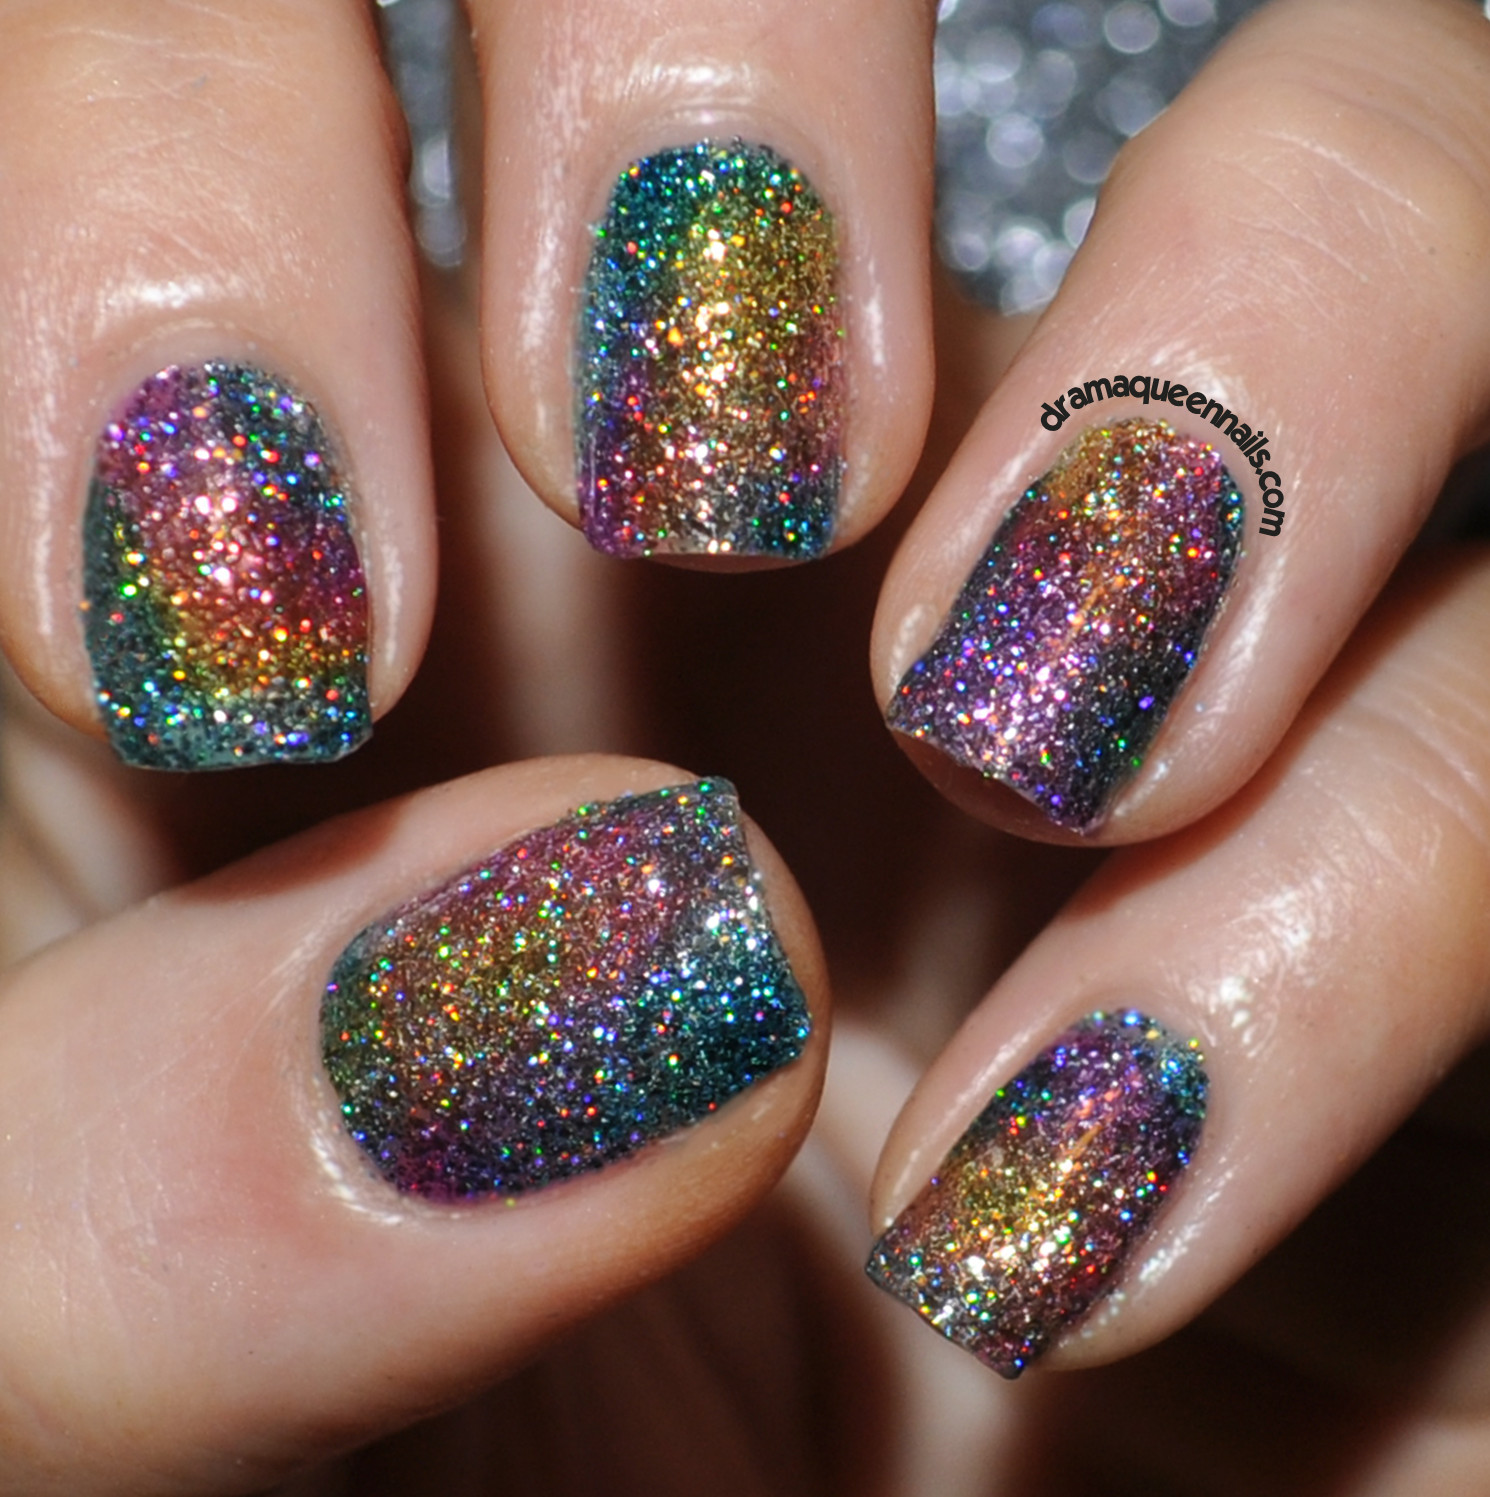 Sparkly Glitter Nails
 Drama Queen Nails Rainbow Sparkle Nails with Fun Lacquer